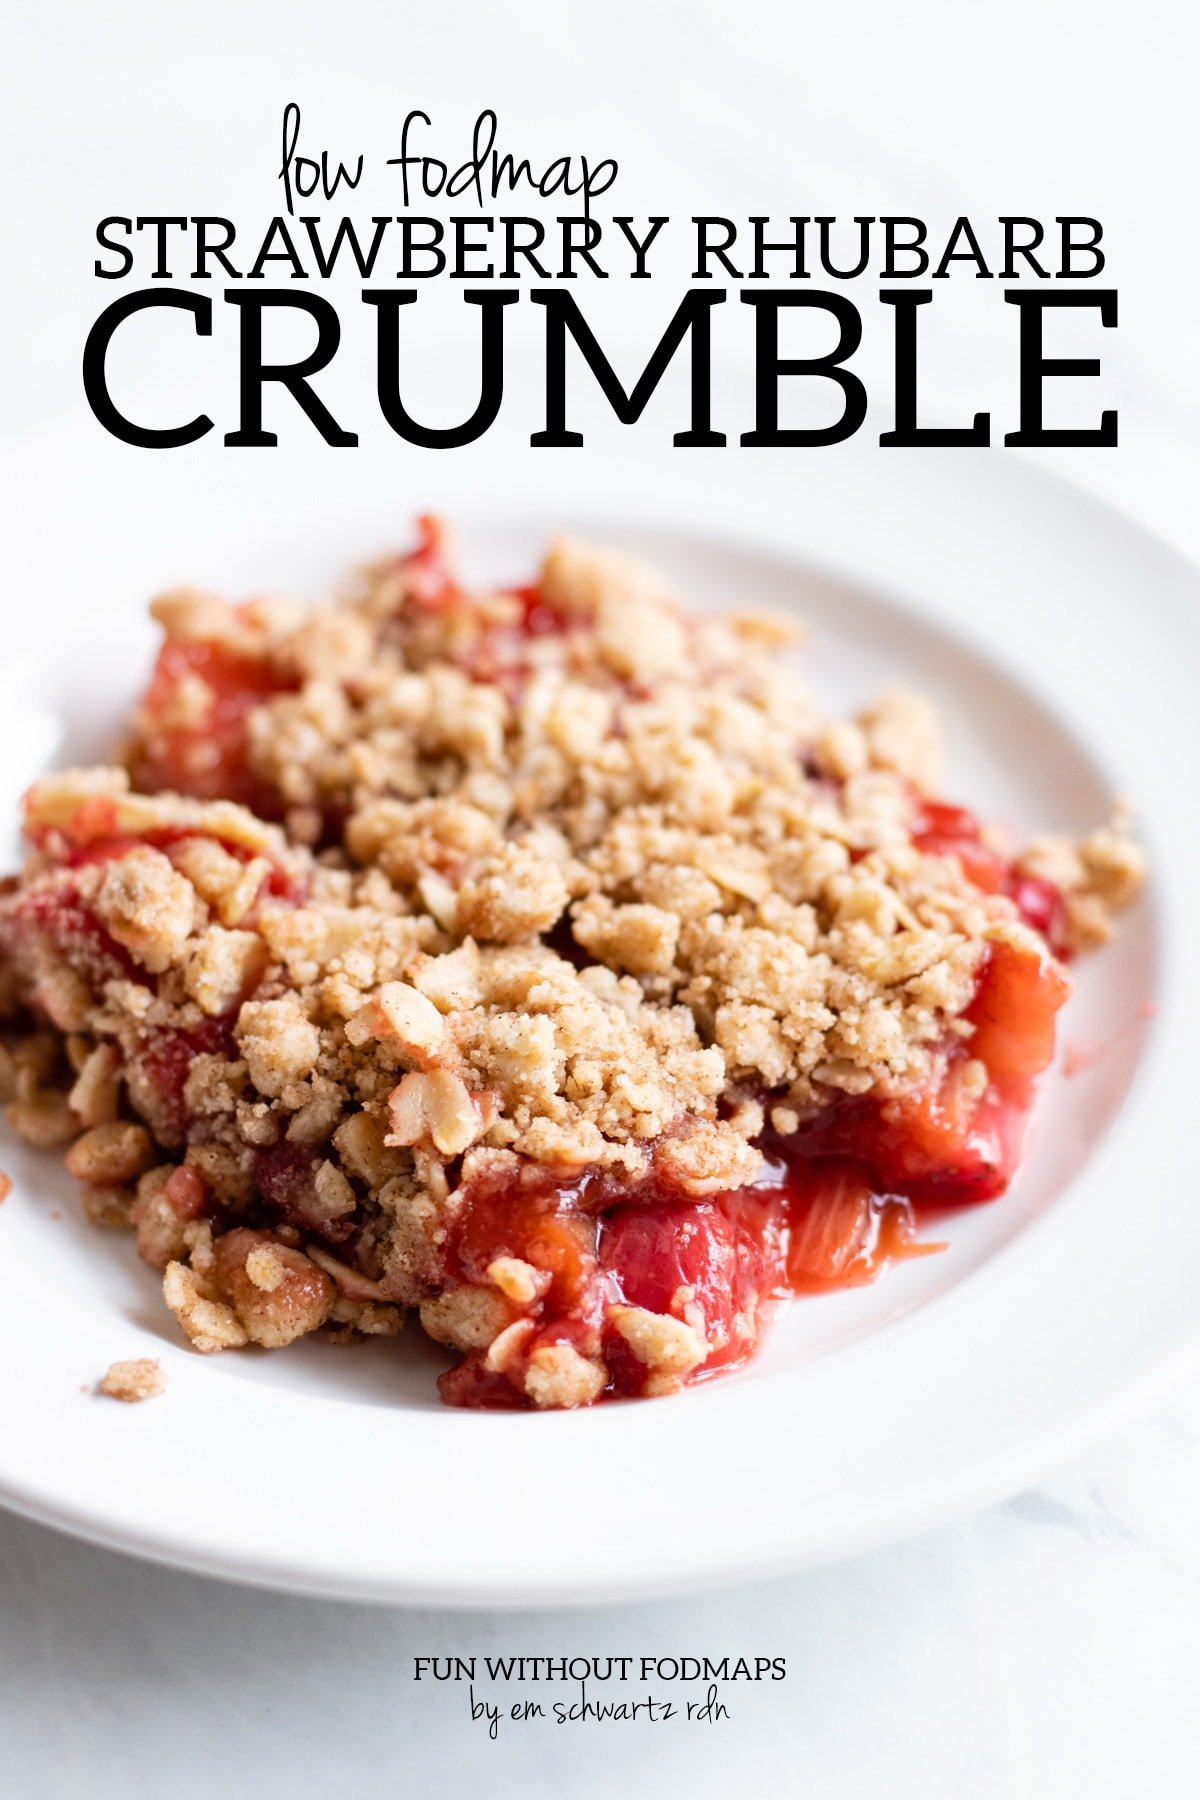 A close up of strawberry-rhubarb crumble on a white plate. Above the plate black text reads "Low FODMAP Strawberry Rhubarb Crumble" and below it "Fun Without FODMAPs by Em Schwartz RDN"